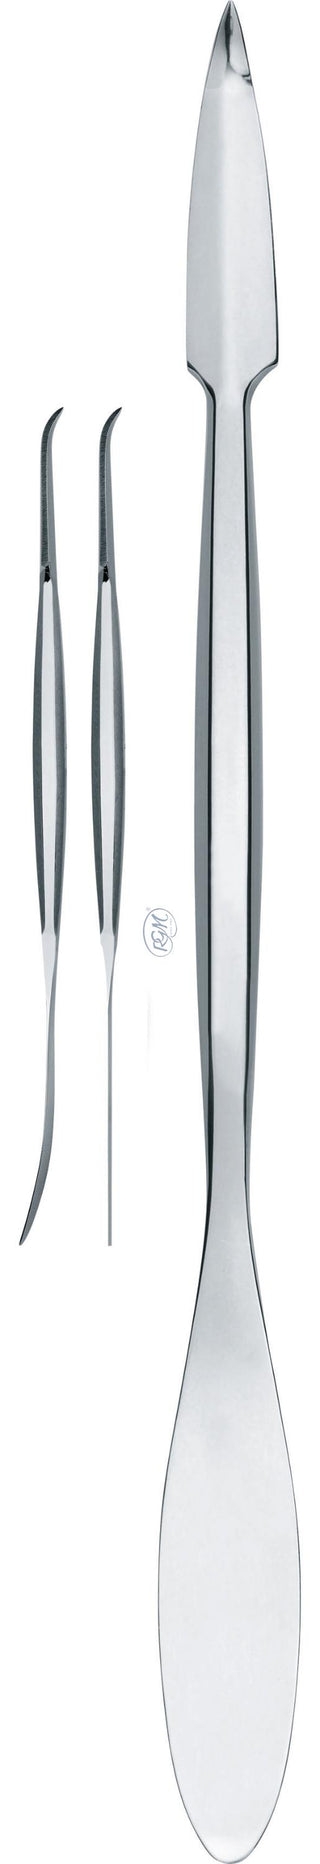 Stainless Steel Curved Spatulas